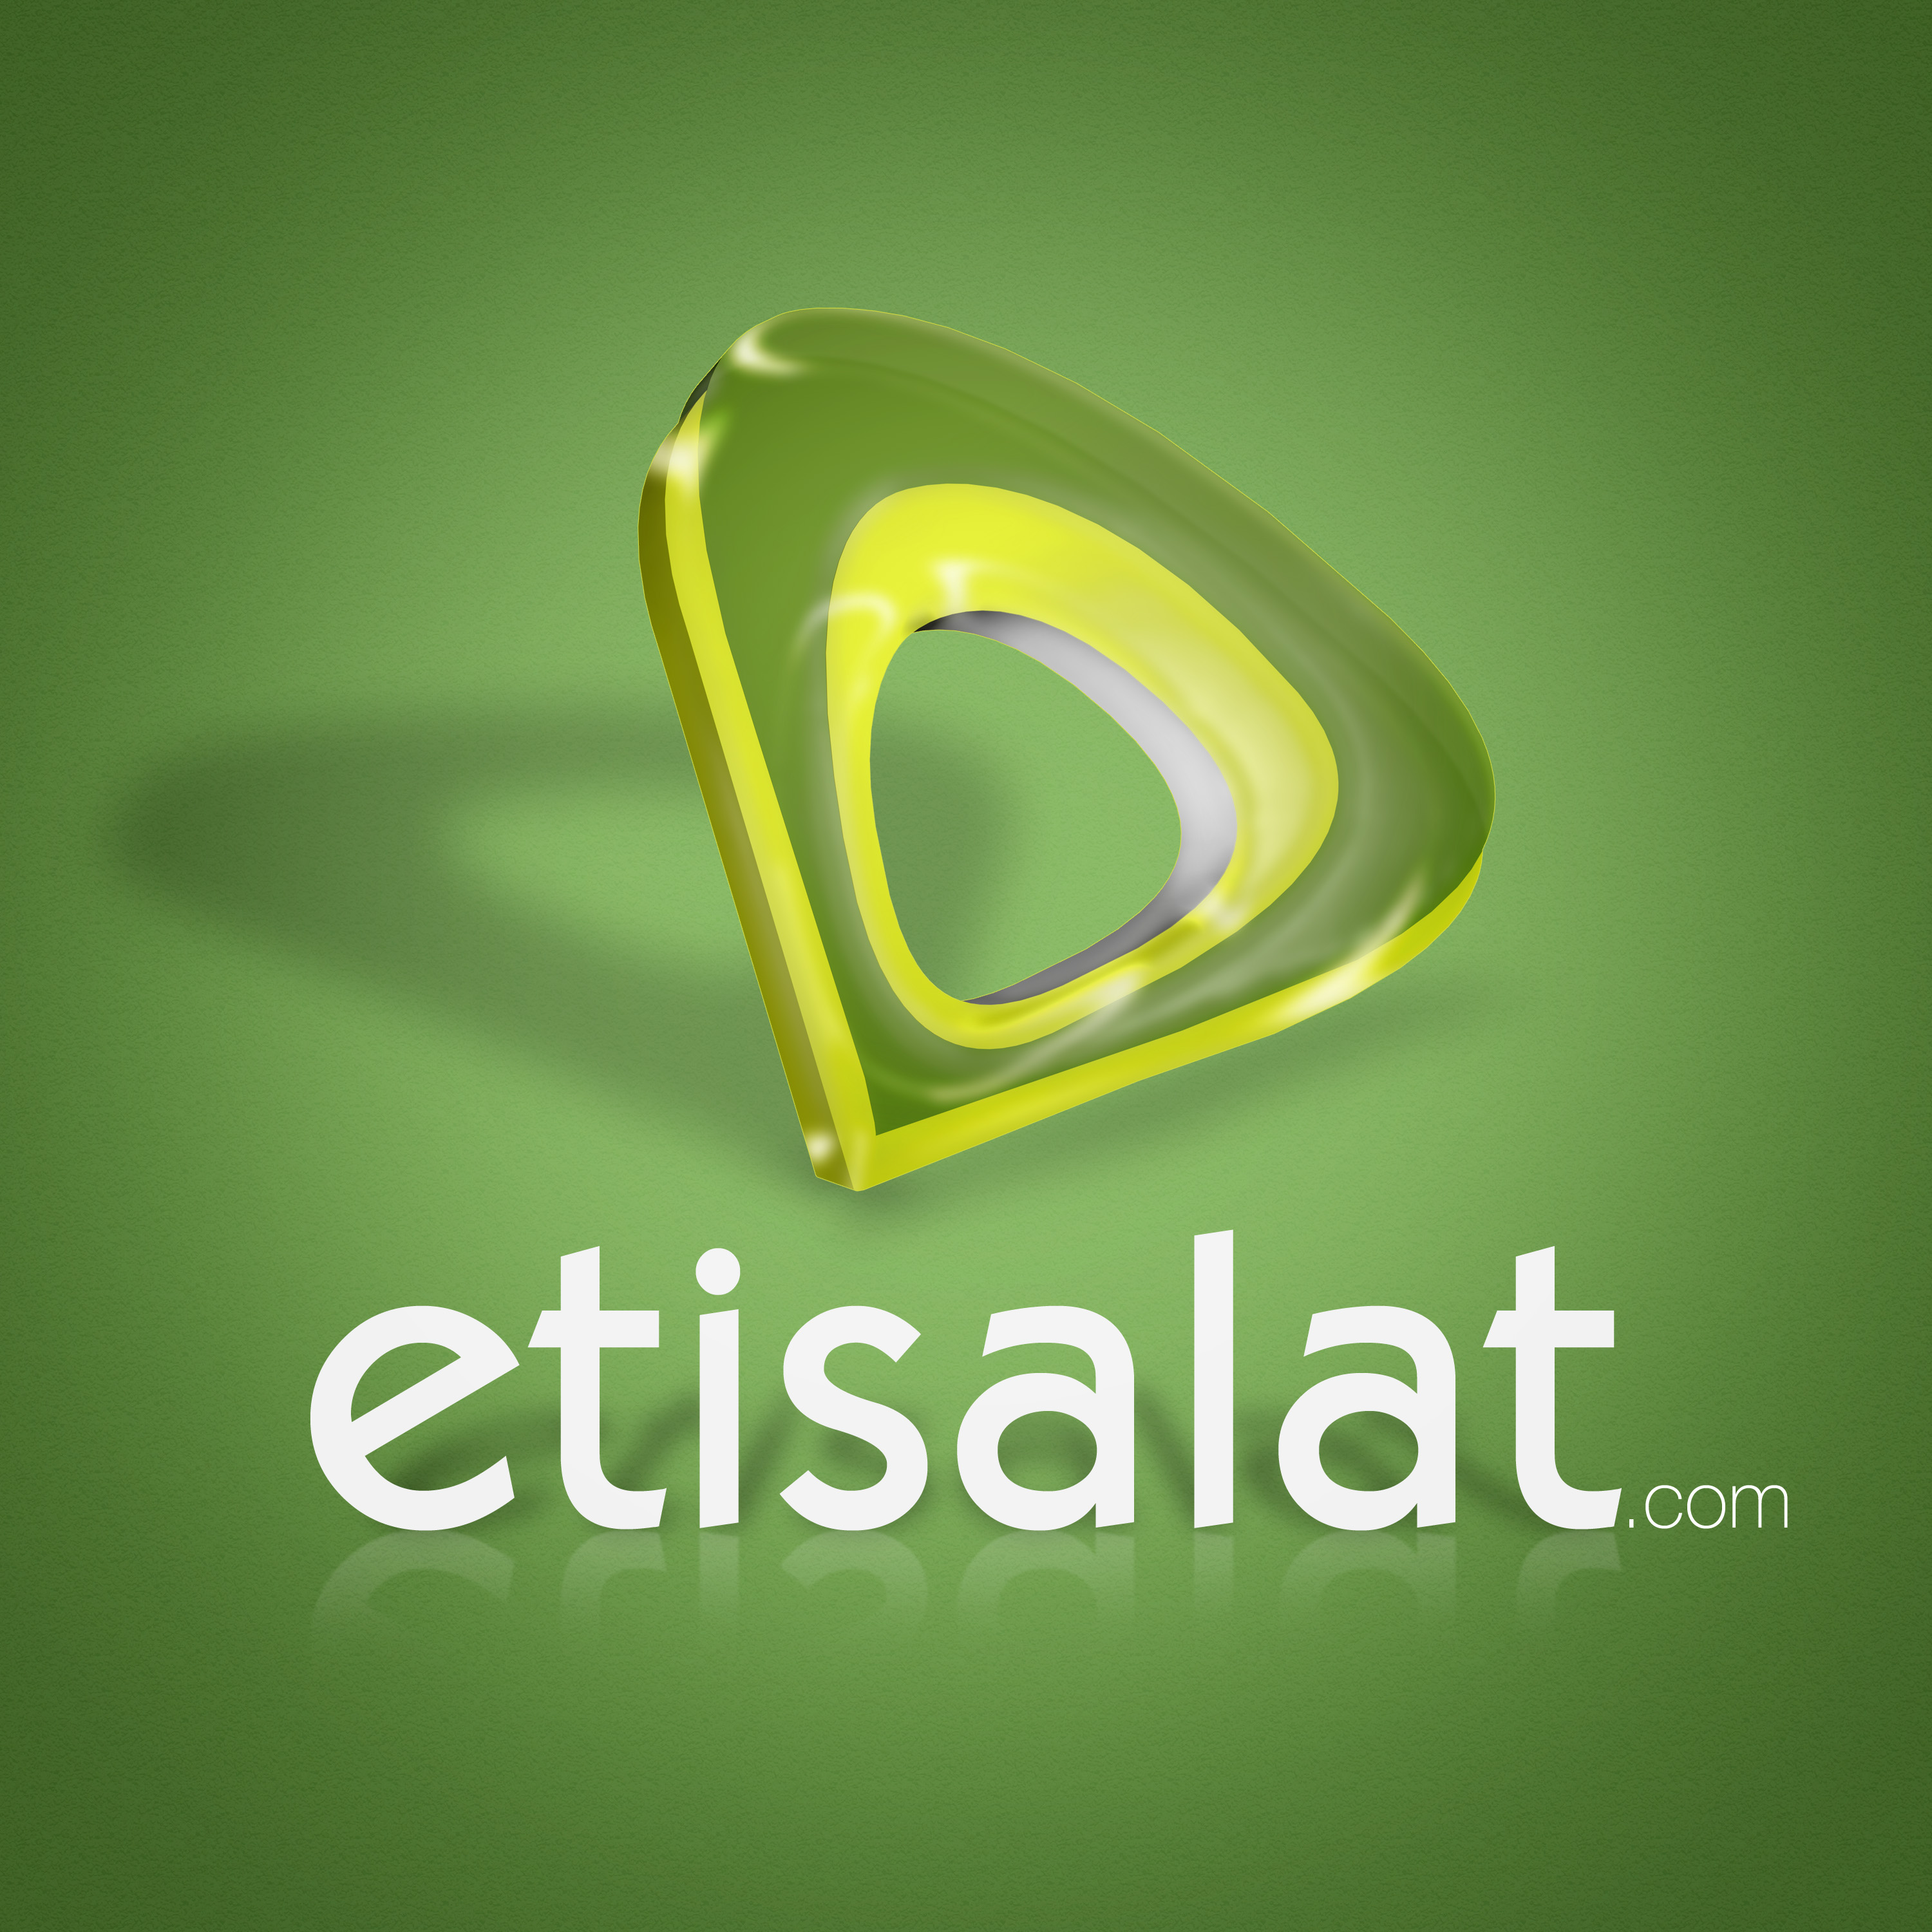 Etisalat Nigeria: FG, NCC, CBN To Save The TelCo From the Banks